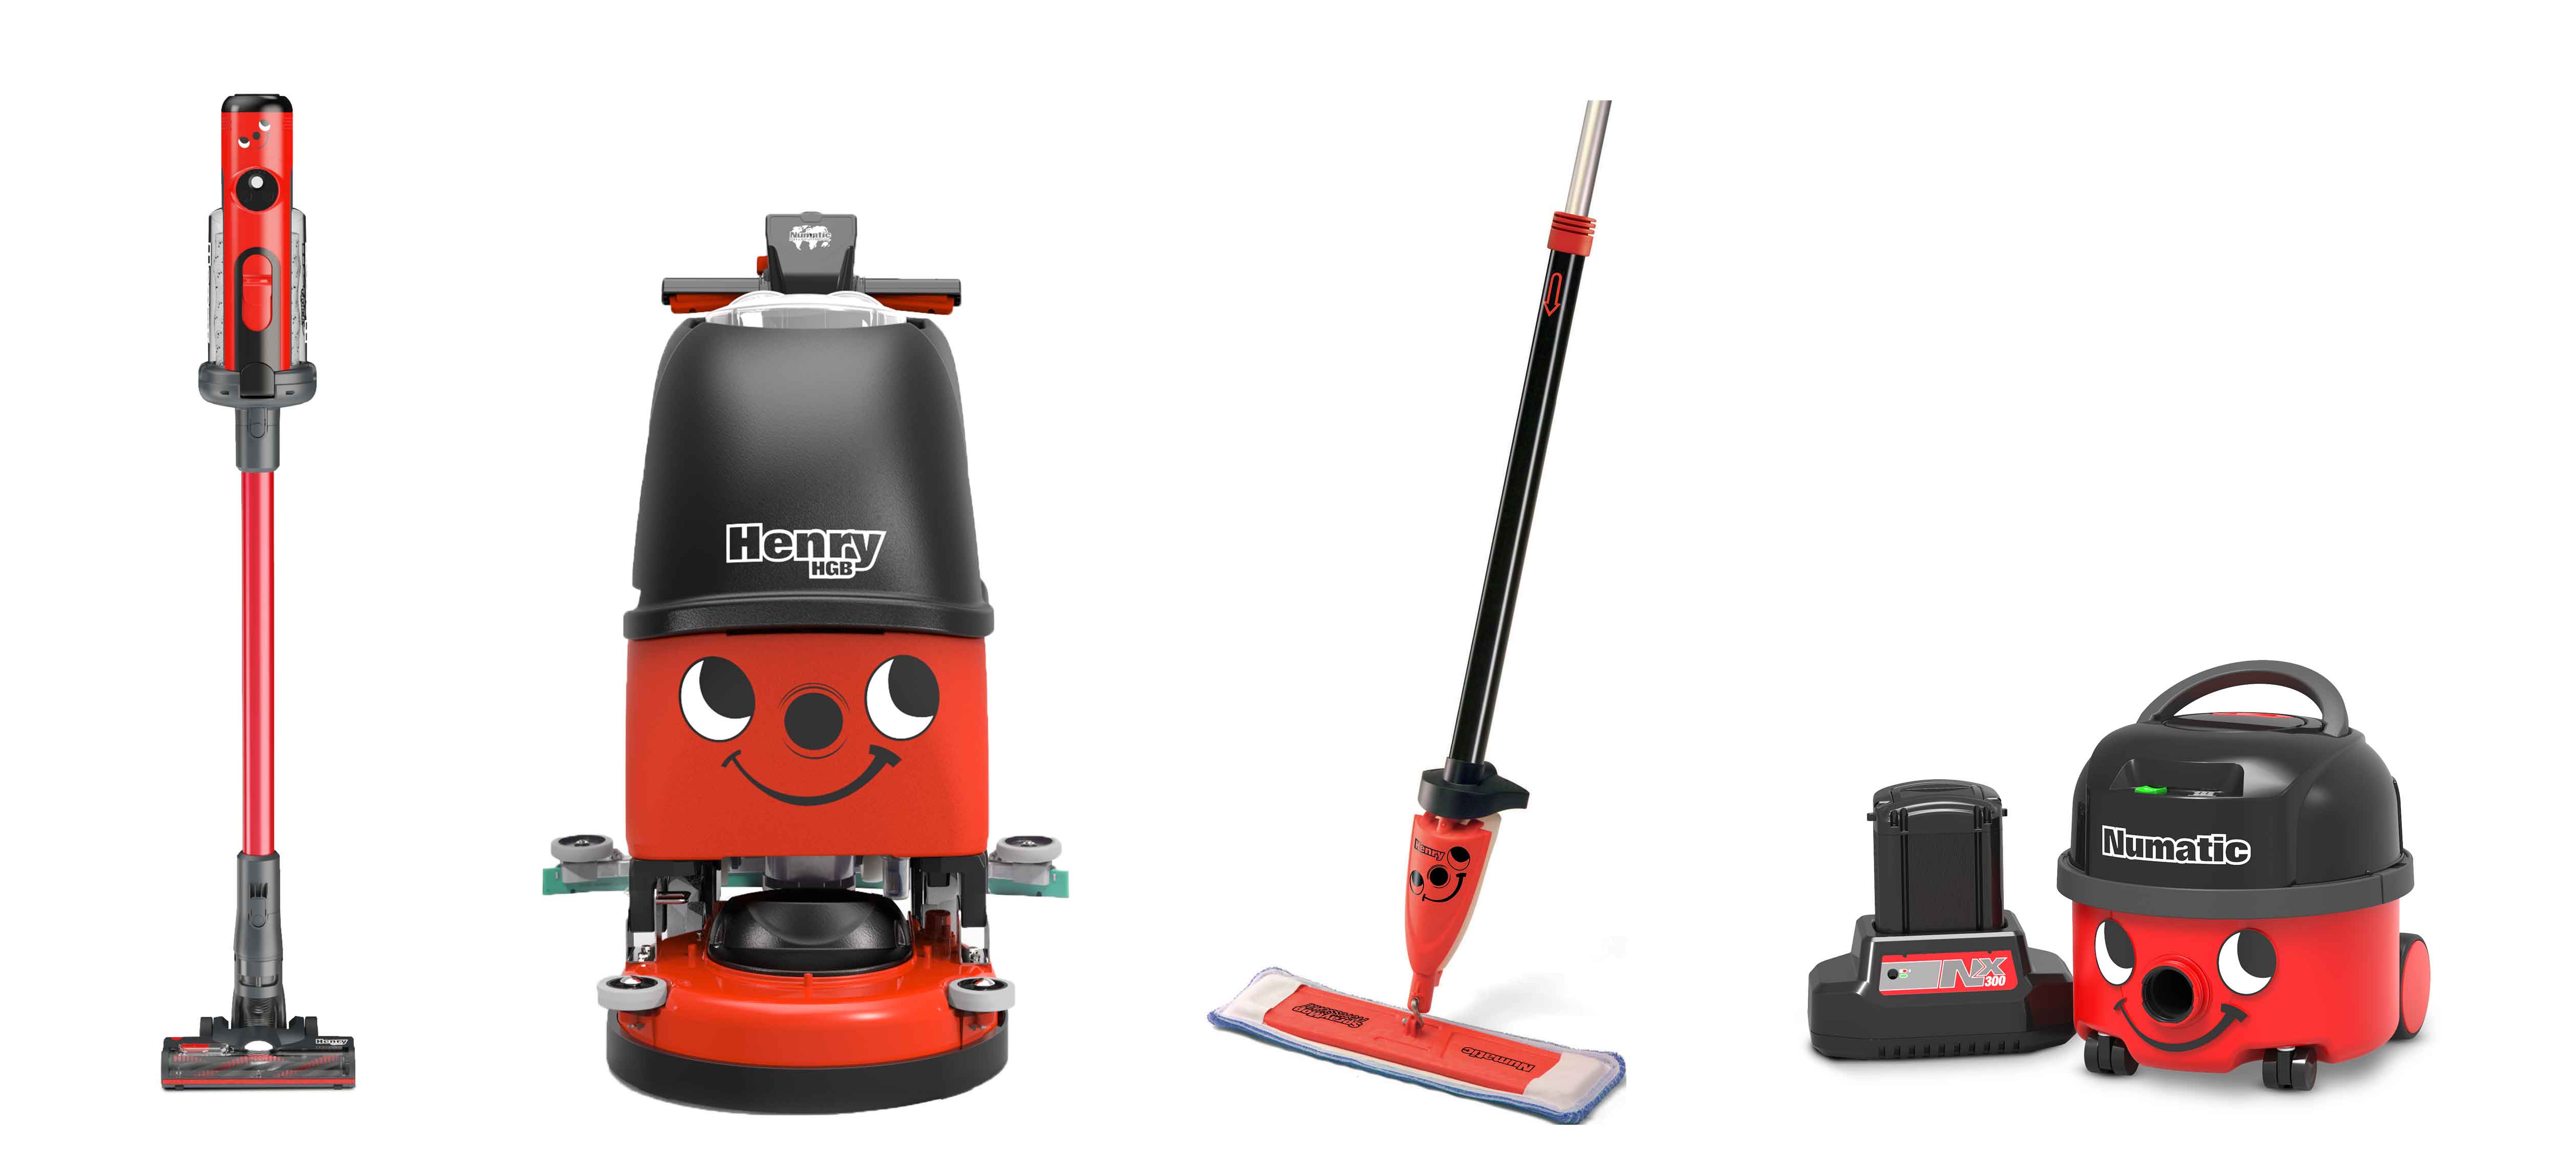 Numatic Henry models including Henry Quick, Henry Scrubber, Henry Mop and the cordless Henry